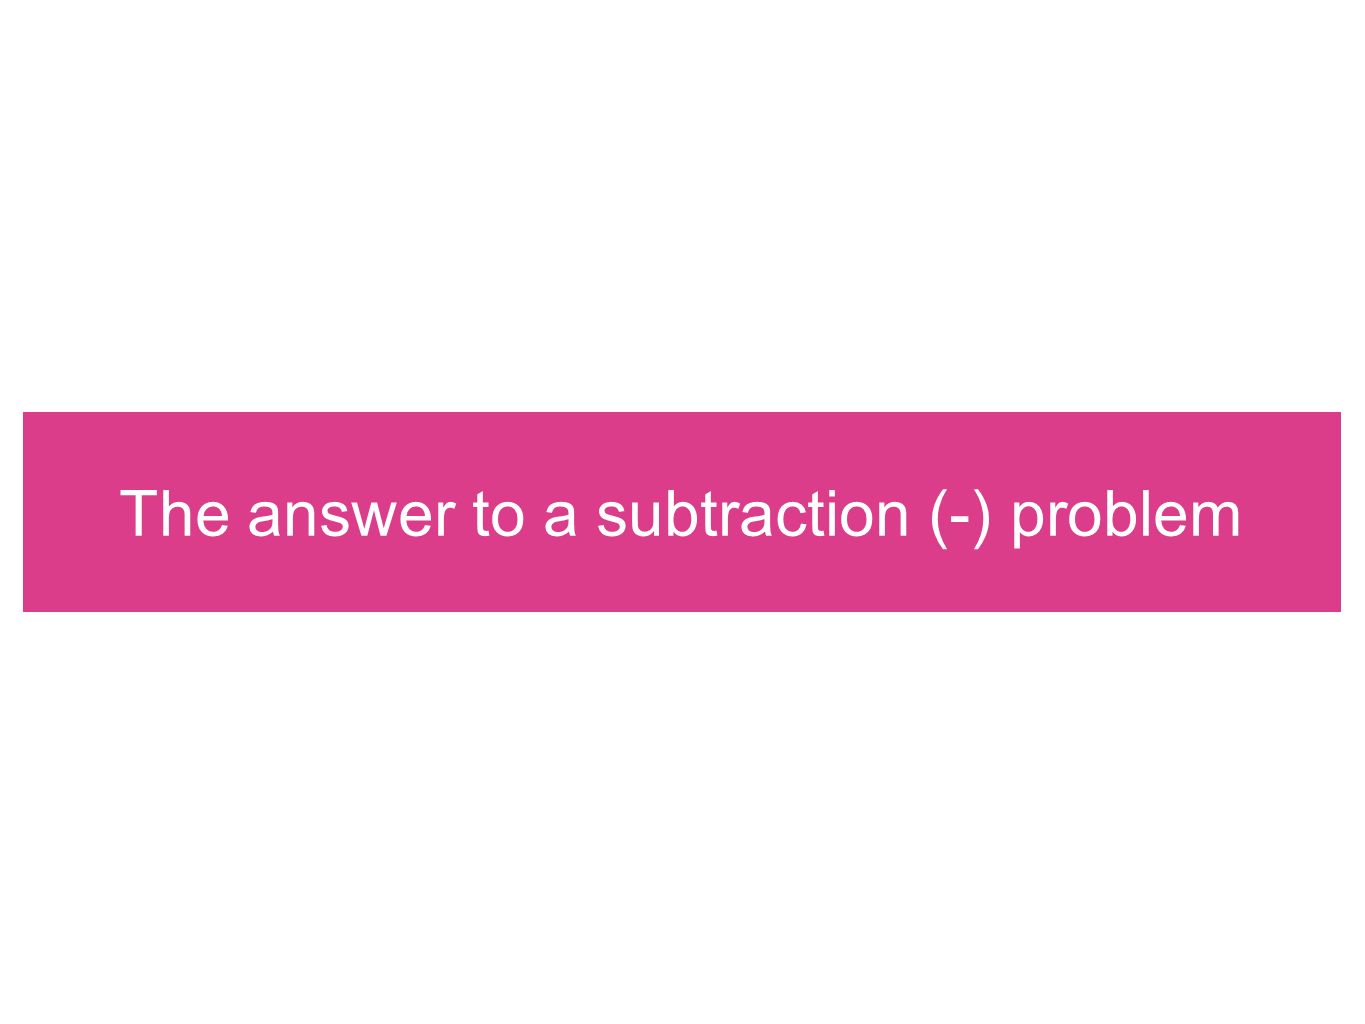 The answer to a subtraction (-) problem